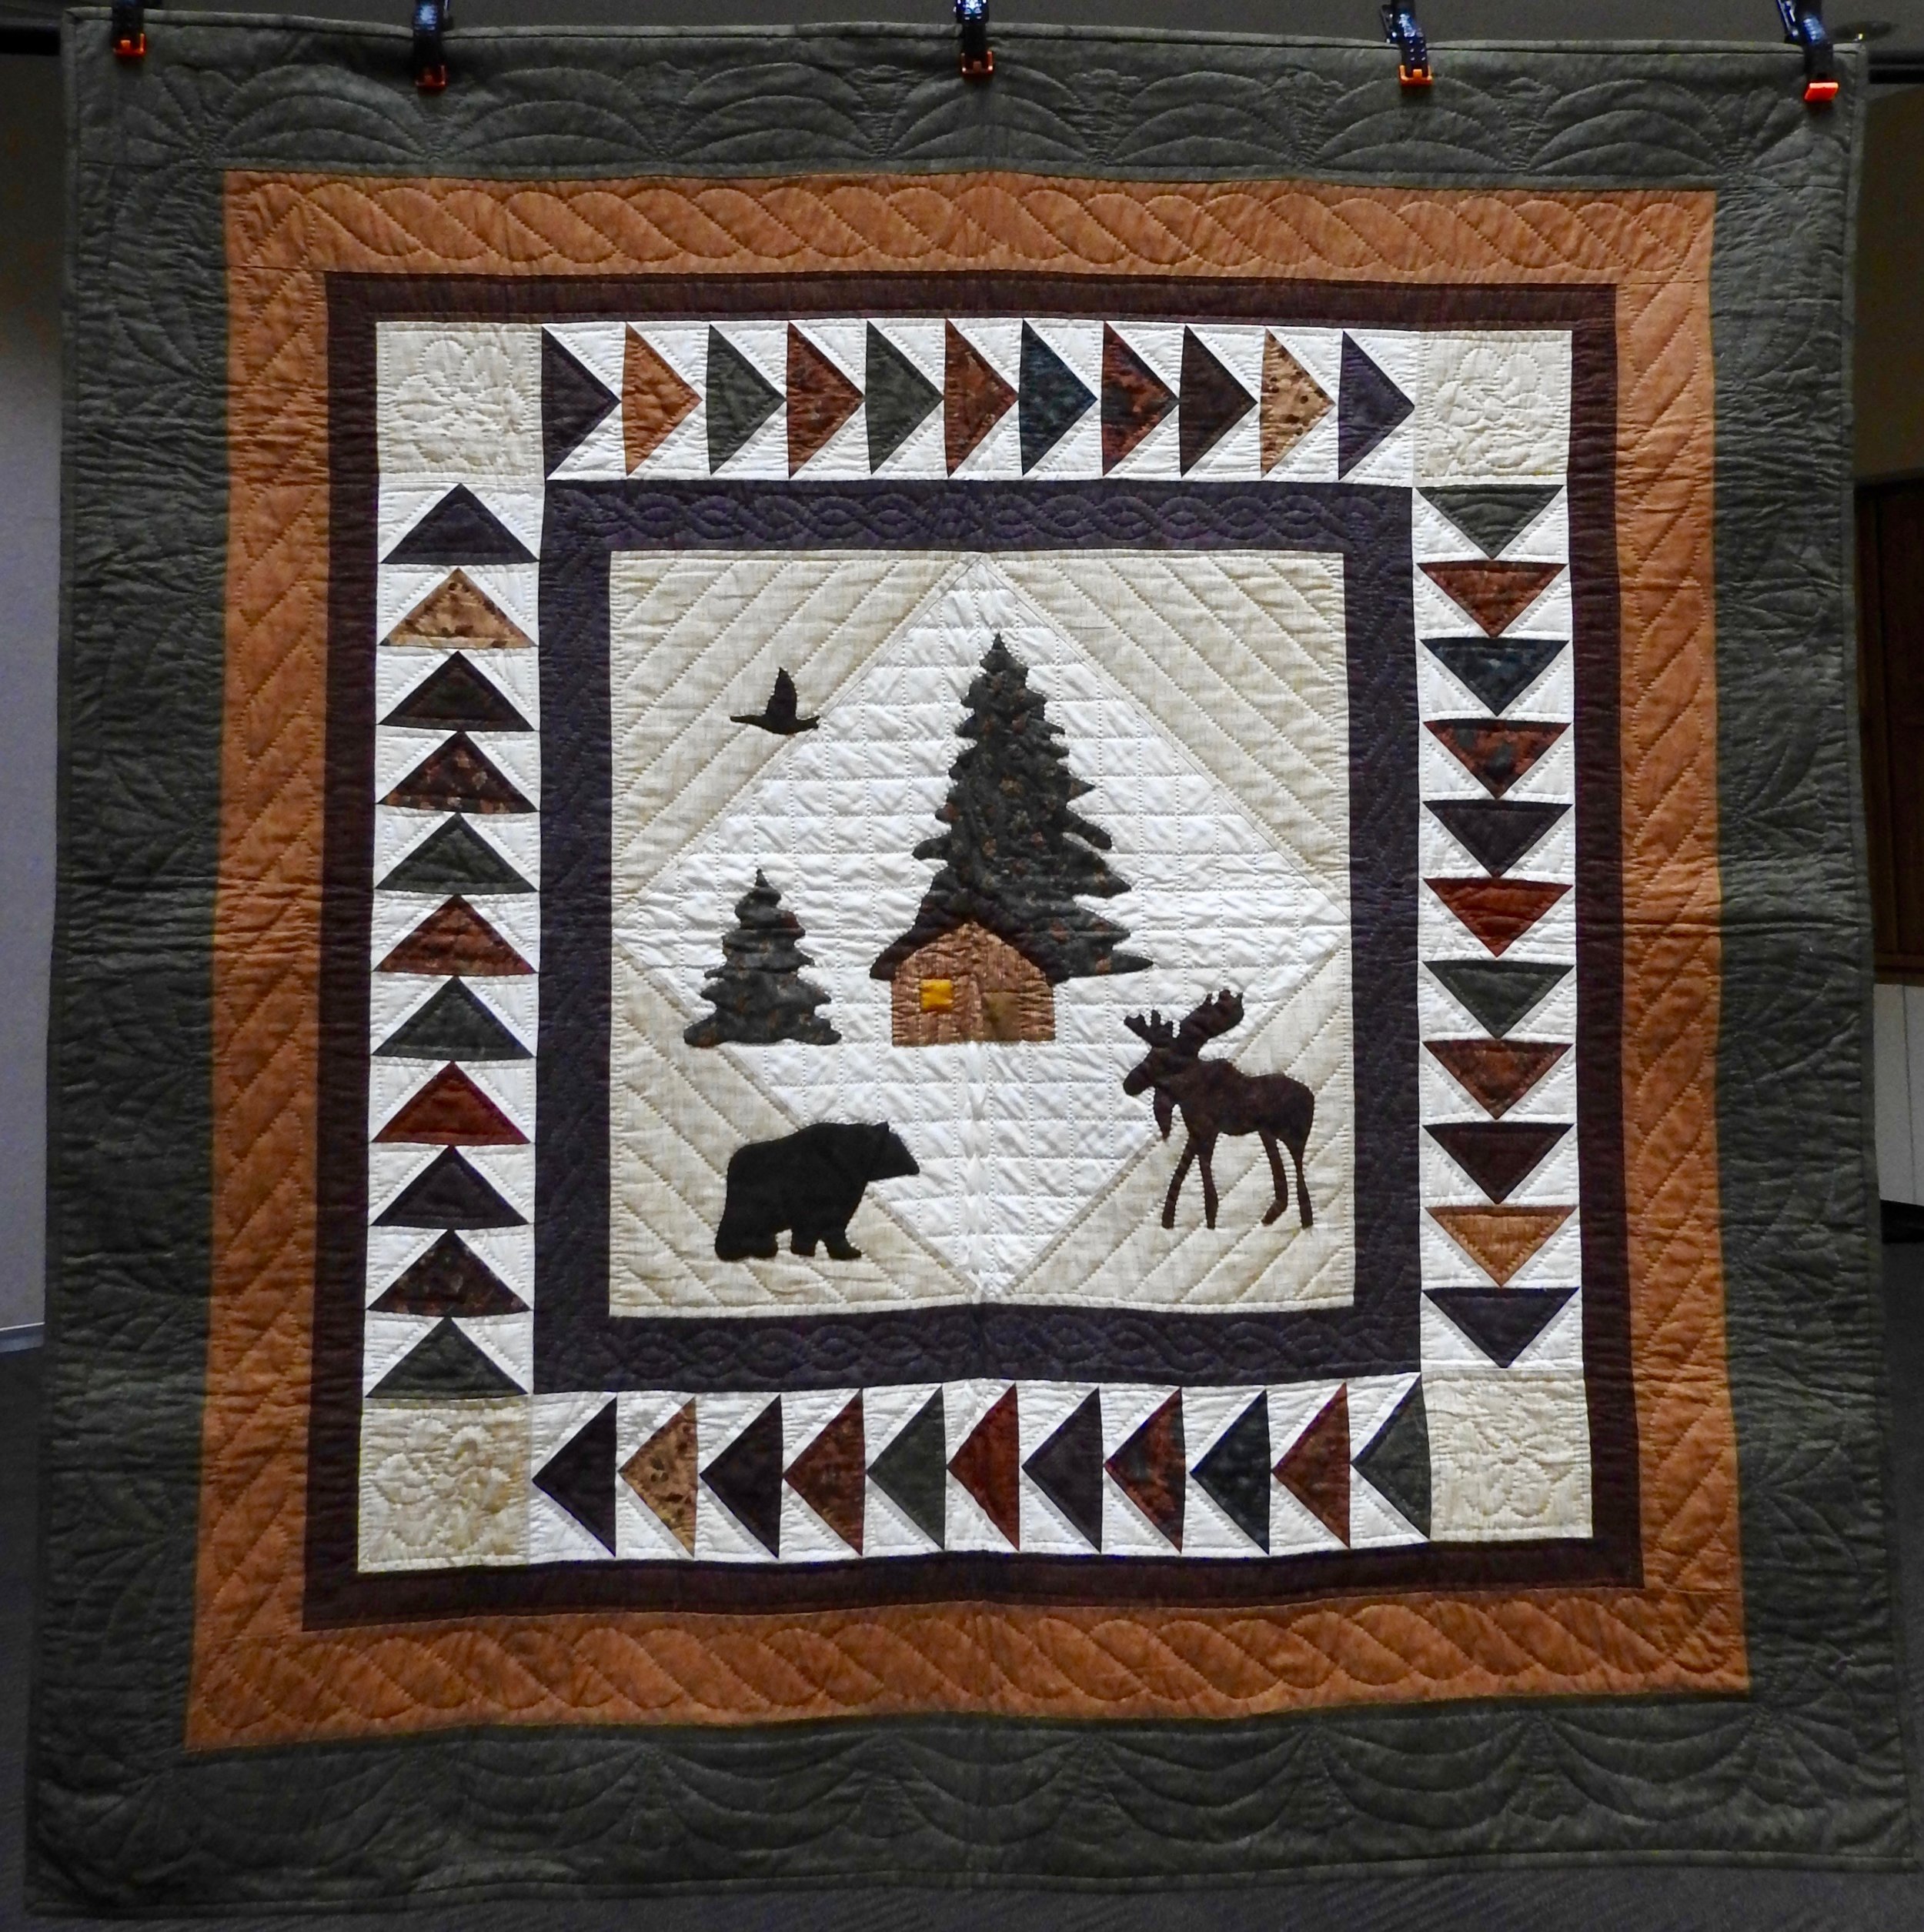 Rustic Cabin, Pieced, Appliquéd, Hand Quilted, donated by Ann Marie Gebbart, 54 x 54”